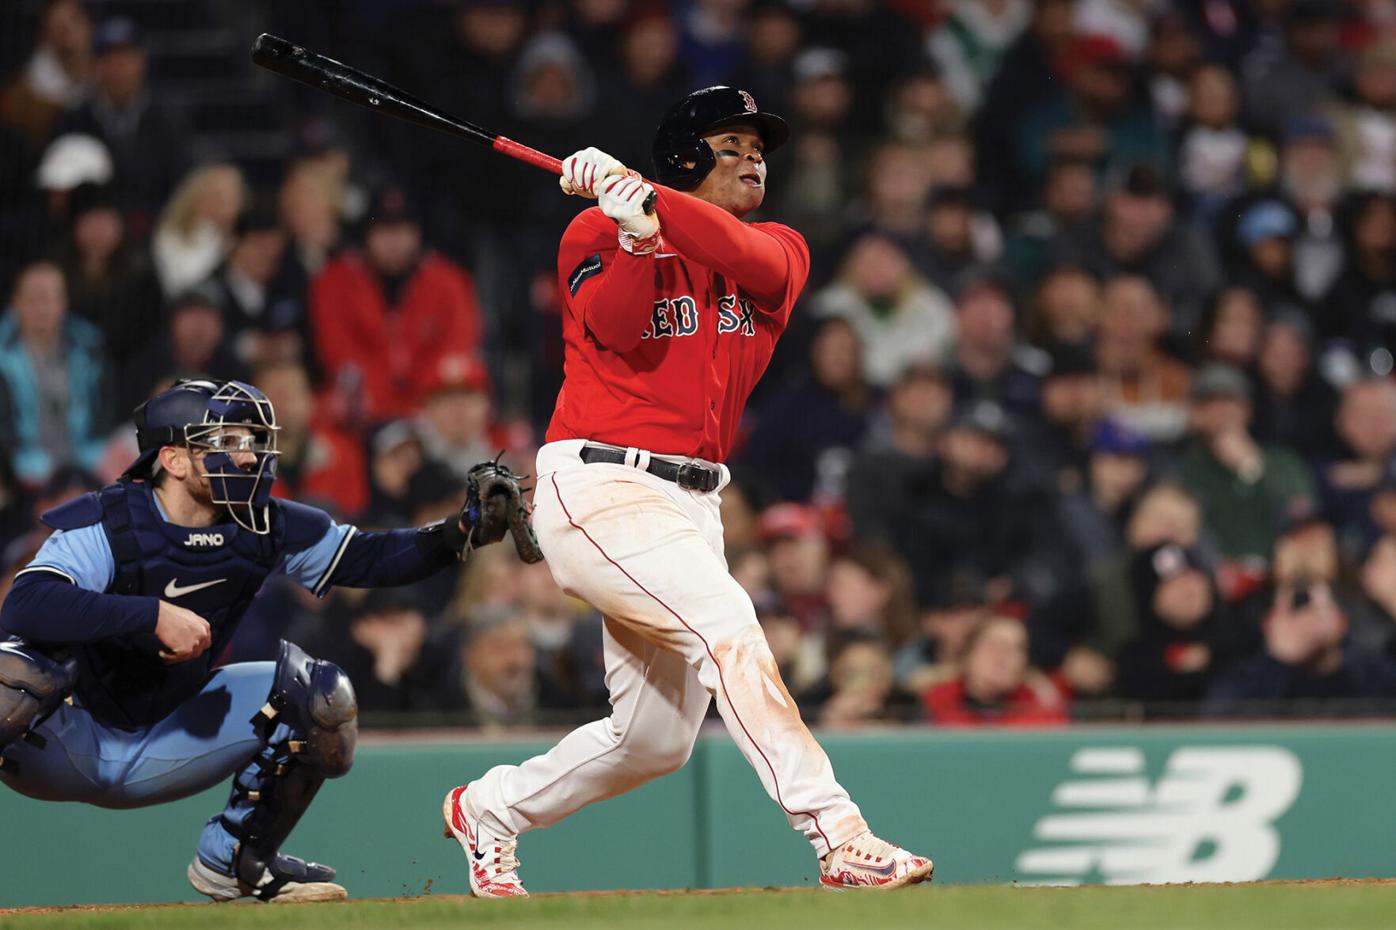 Rafael Devers, Red Sox hold off Blue Jays